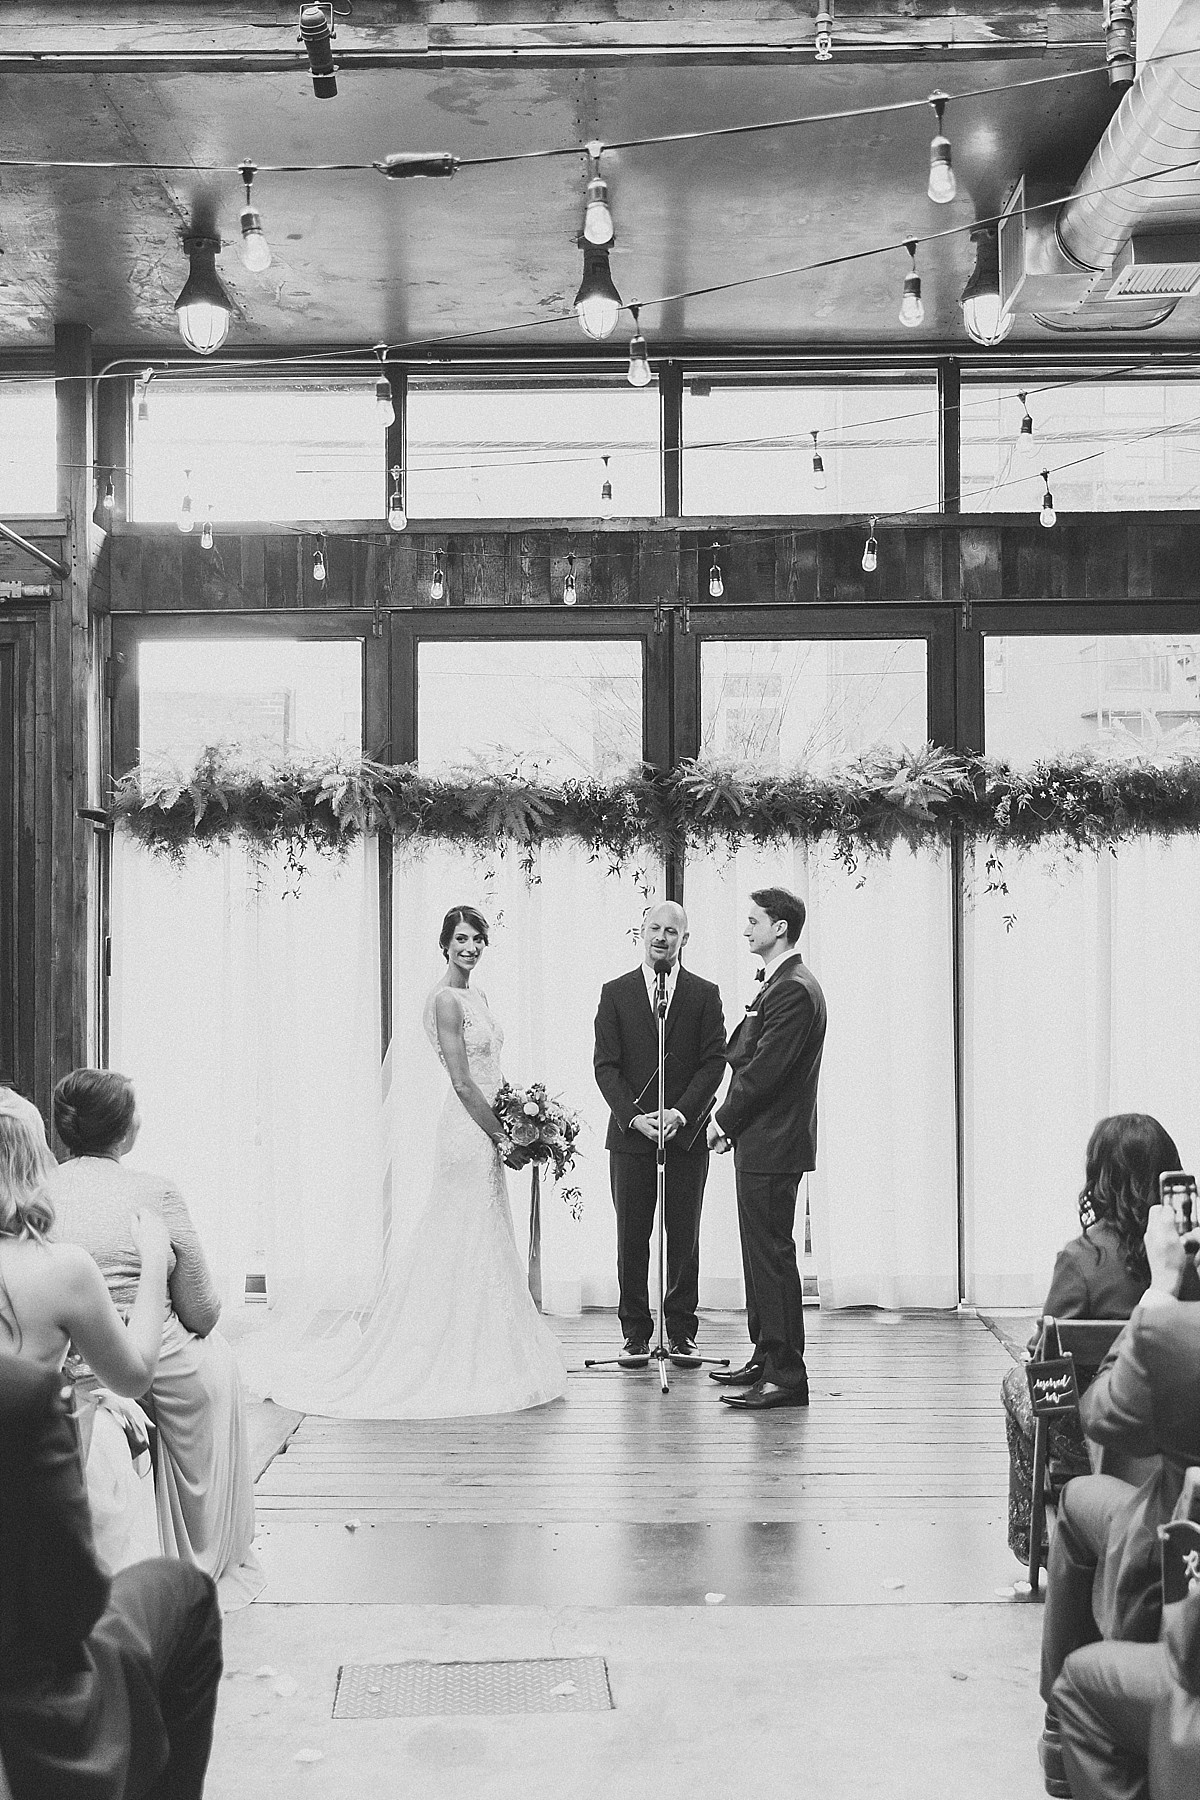 Authentic, candid ceremony photography at the Brooklyn Winery in Williamsburg, by Clean Plate Pictures, Brooklyn wedding photographer.